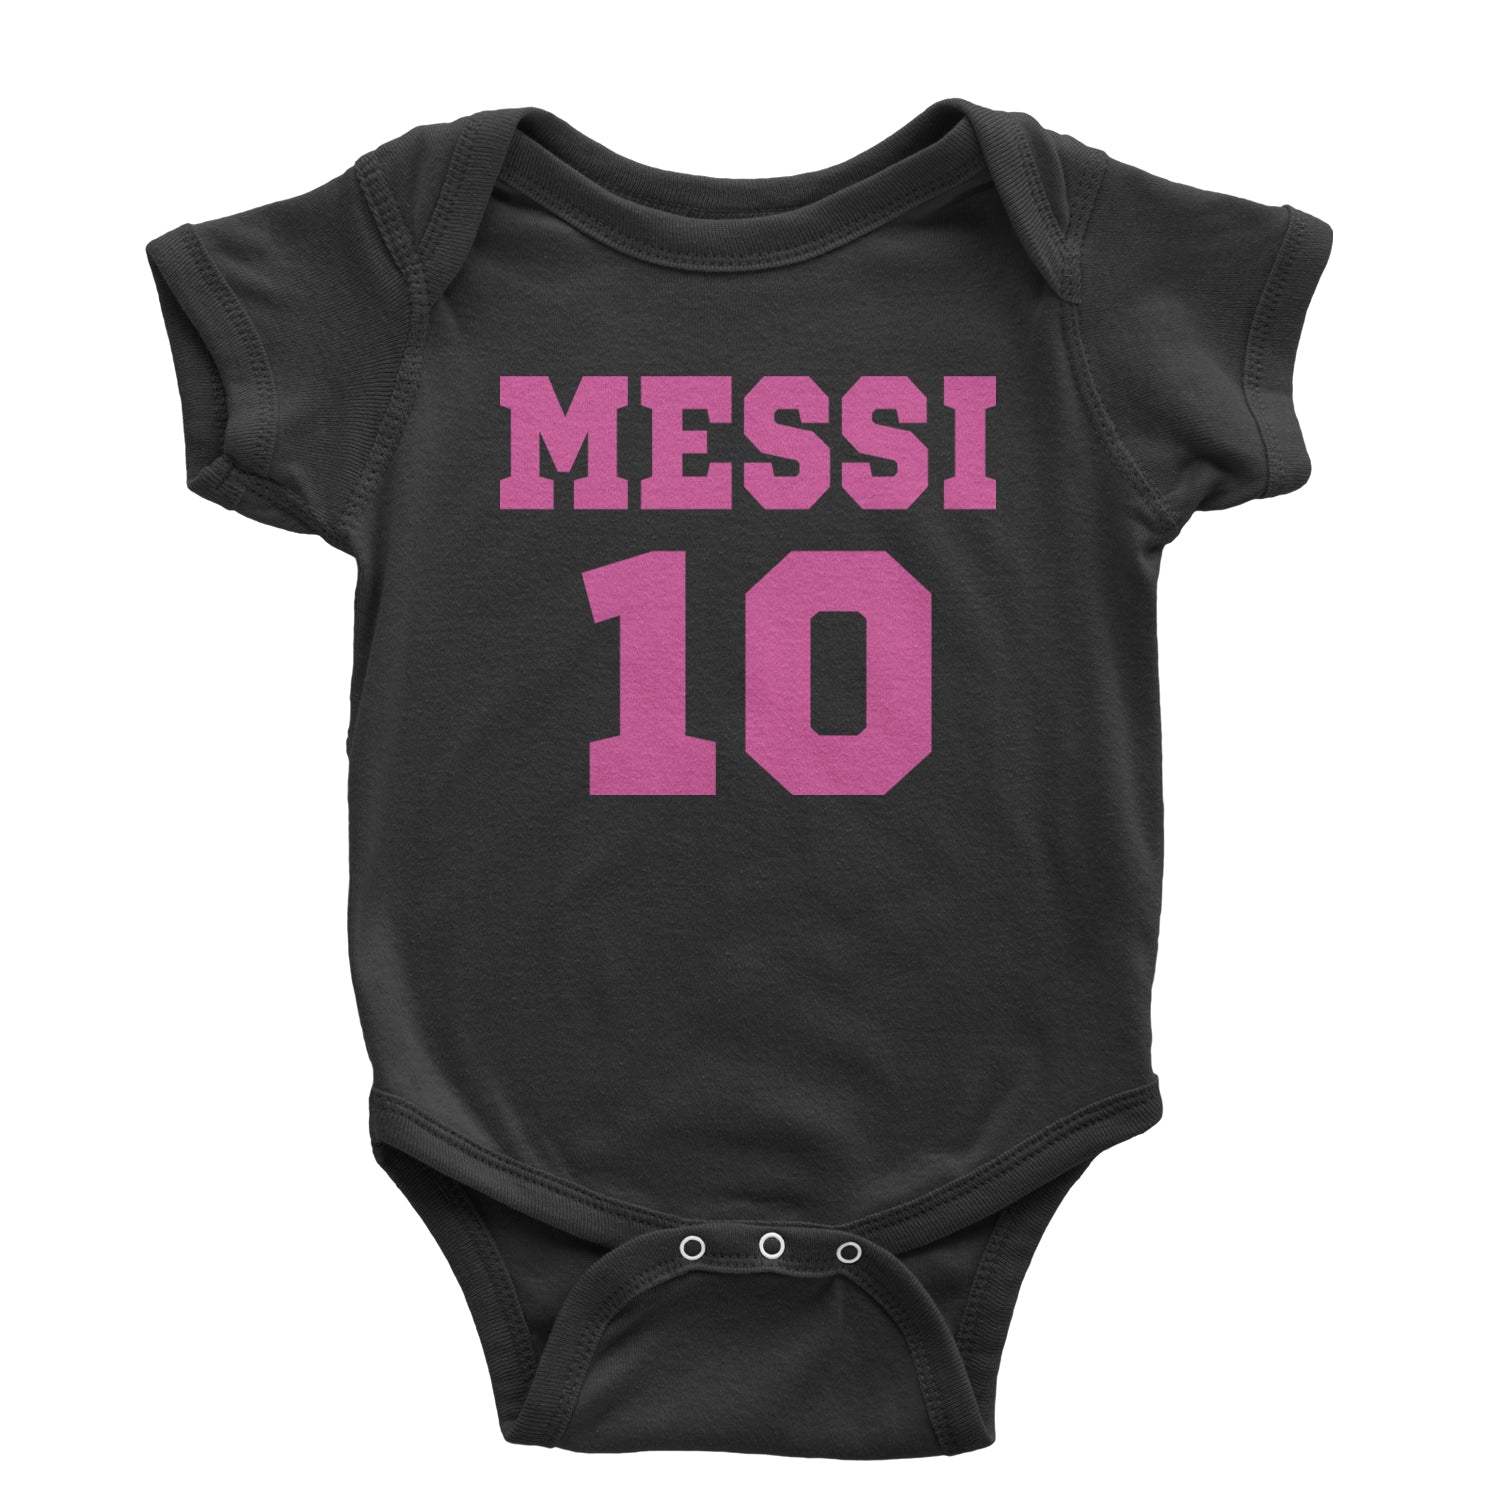 Messi World Soccer Futbol Messiami Infant One-Piece Romper Bodysuit and Toddler T-shirt